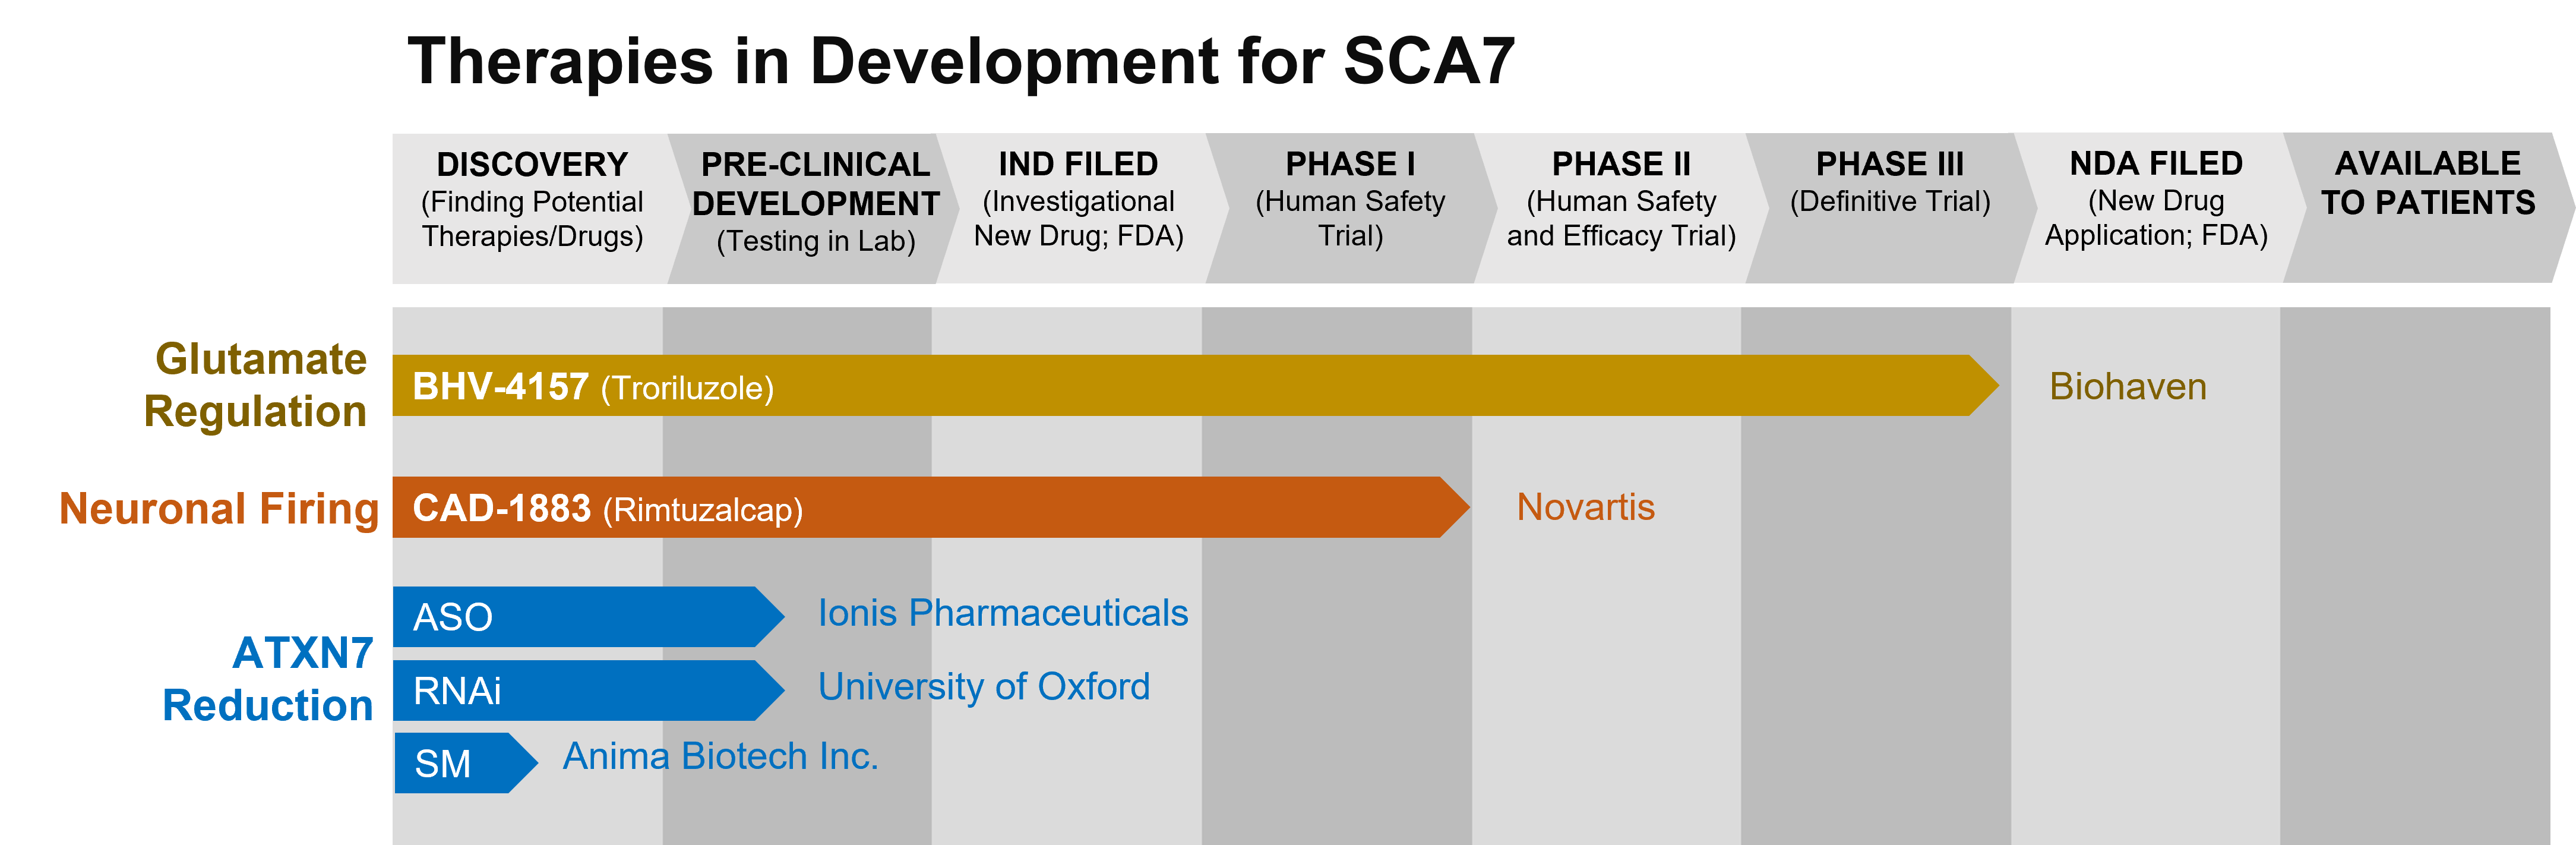 Graph depicting the phase of drug development for various drugs to treat SCA7